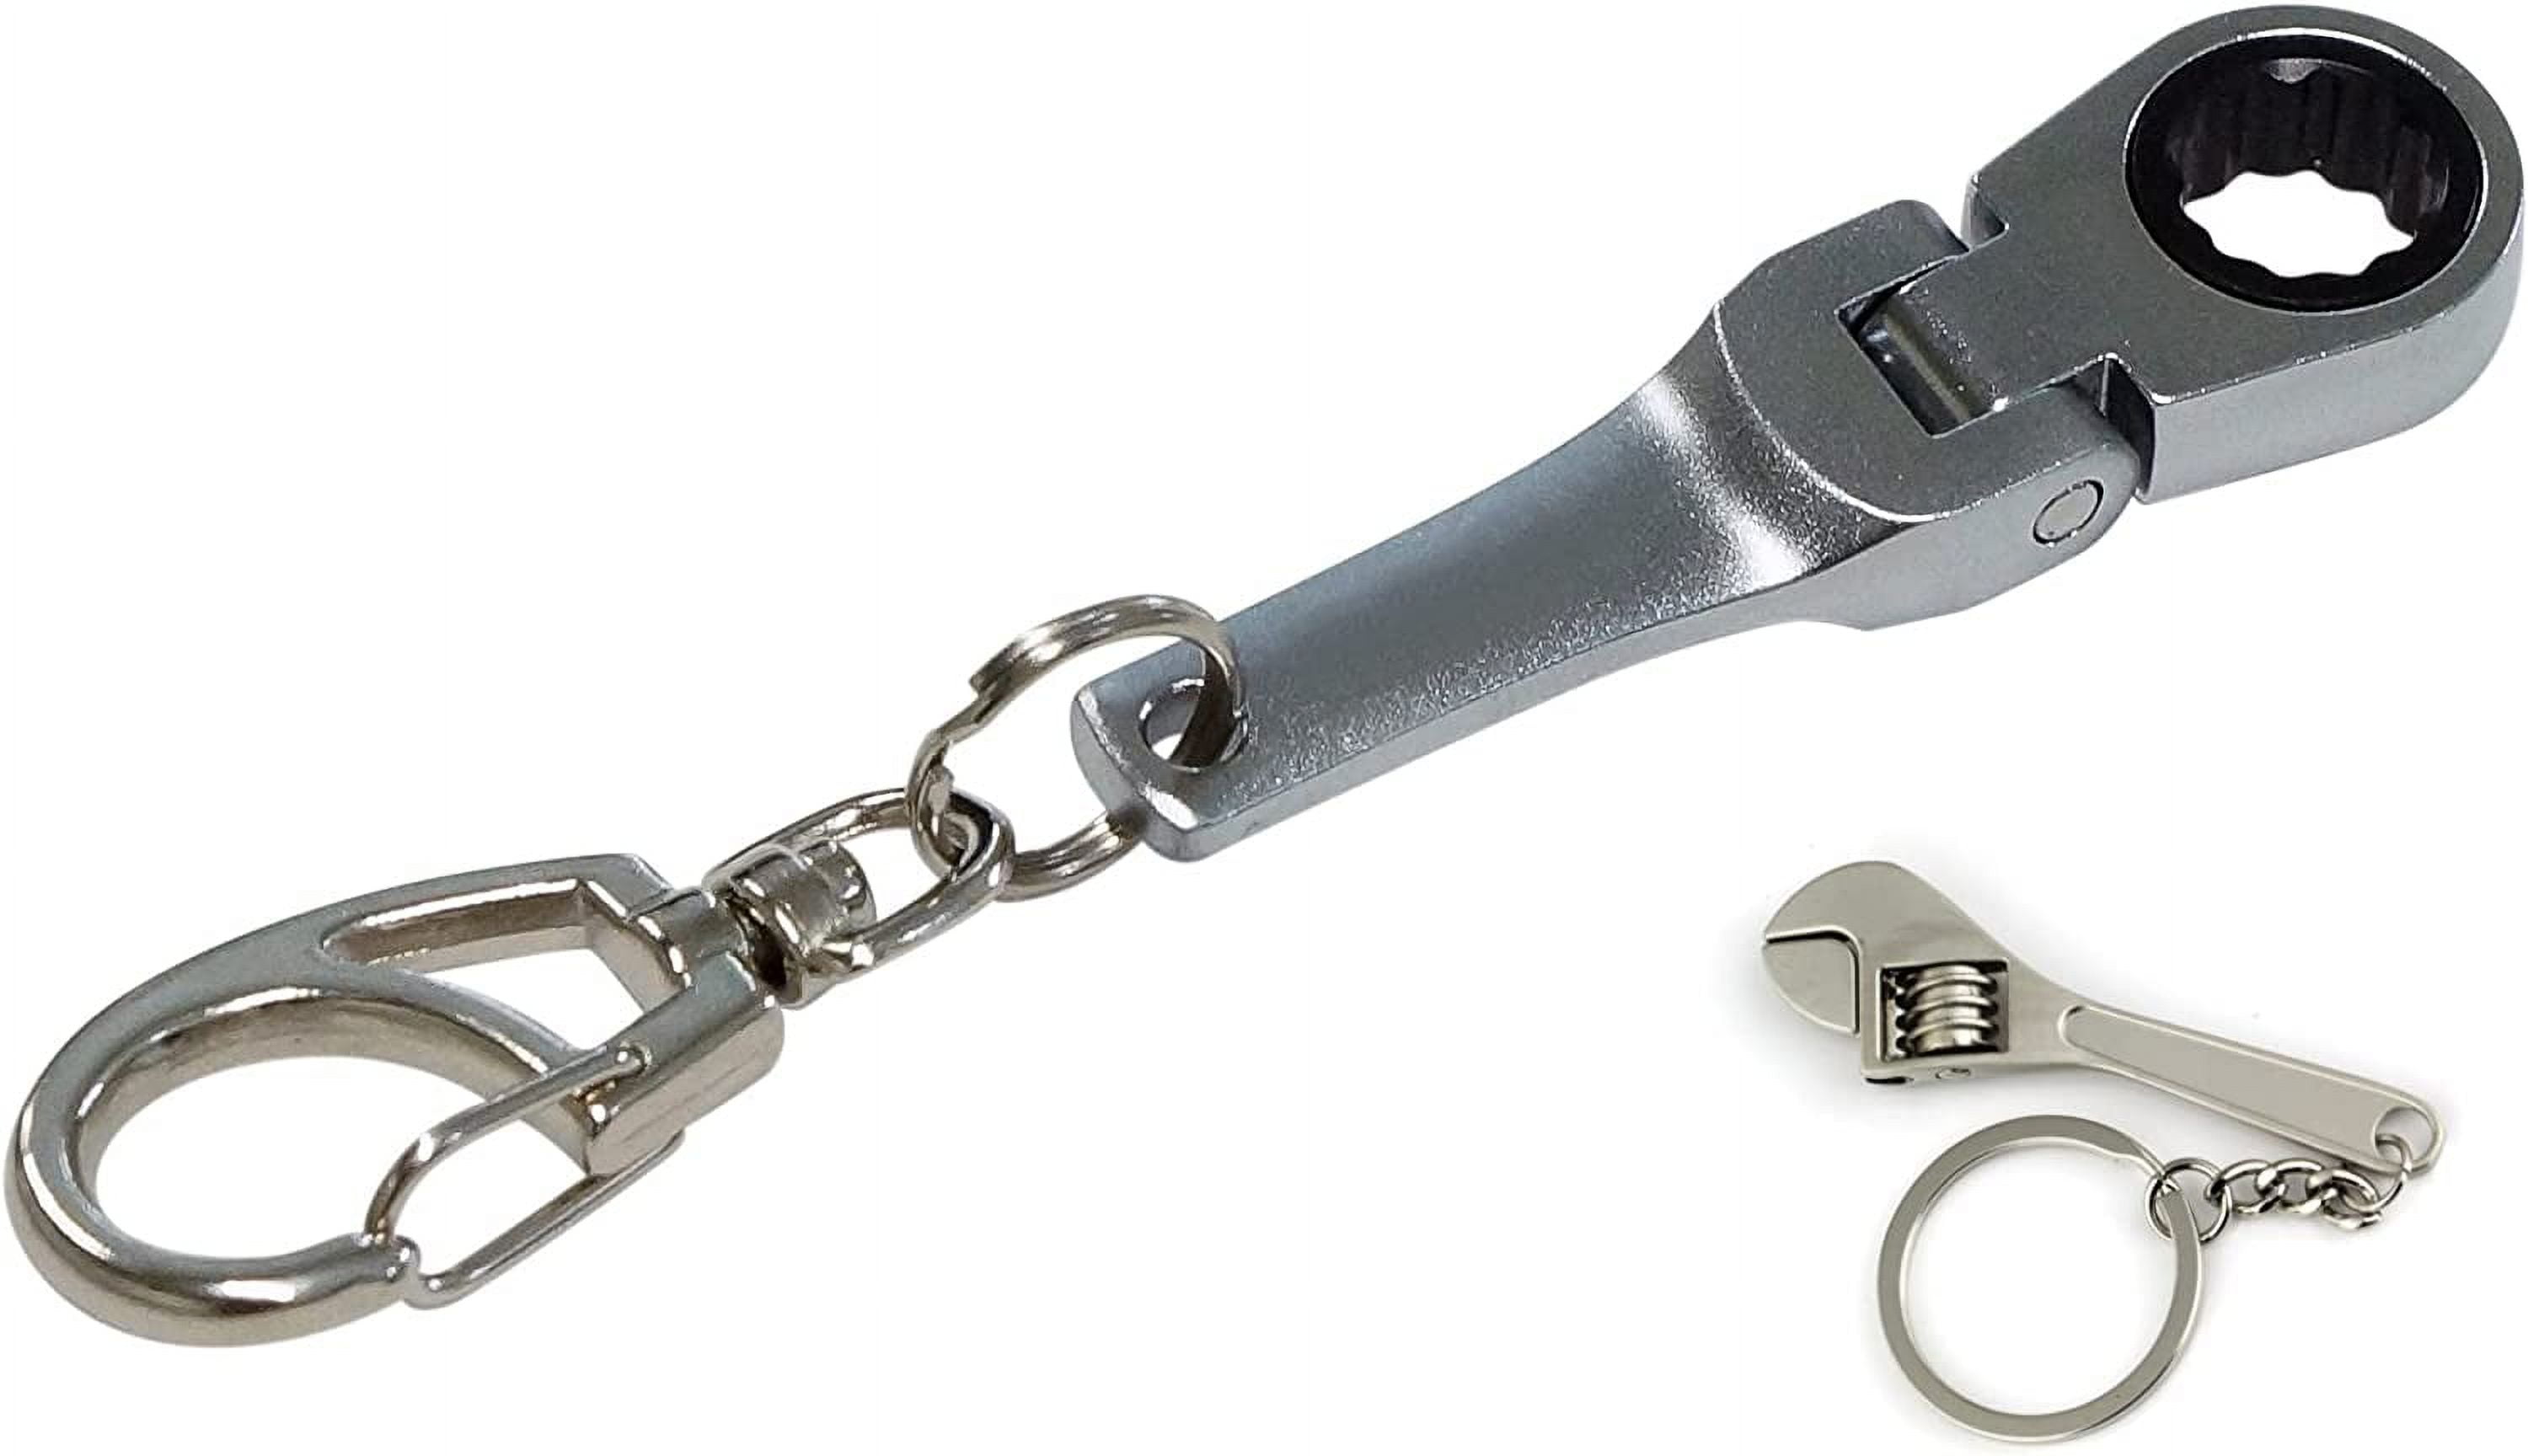 Low Price On Vim CW125 Mini Wrench at